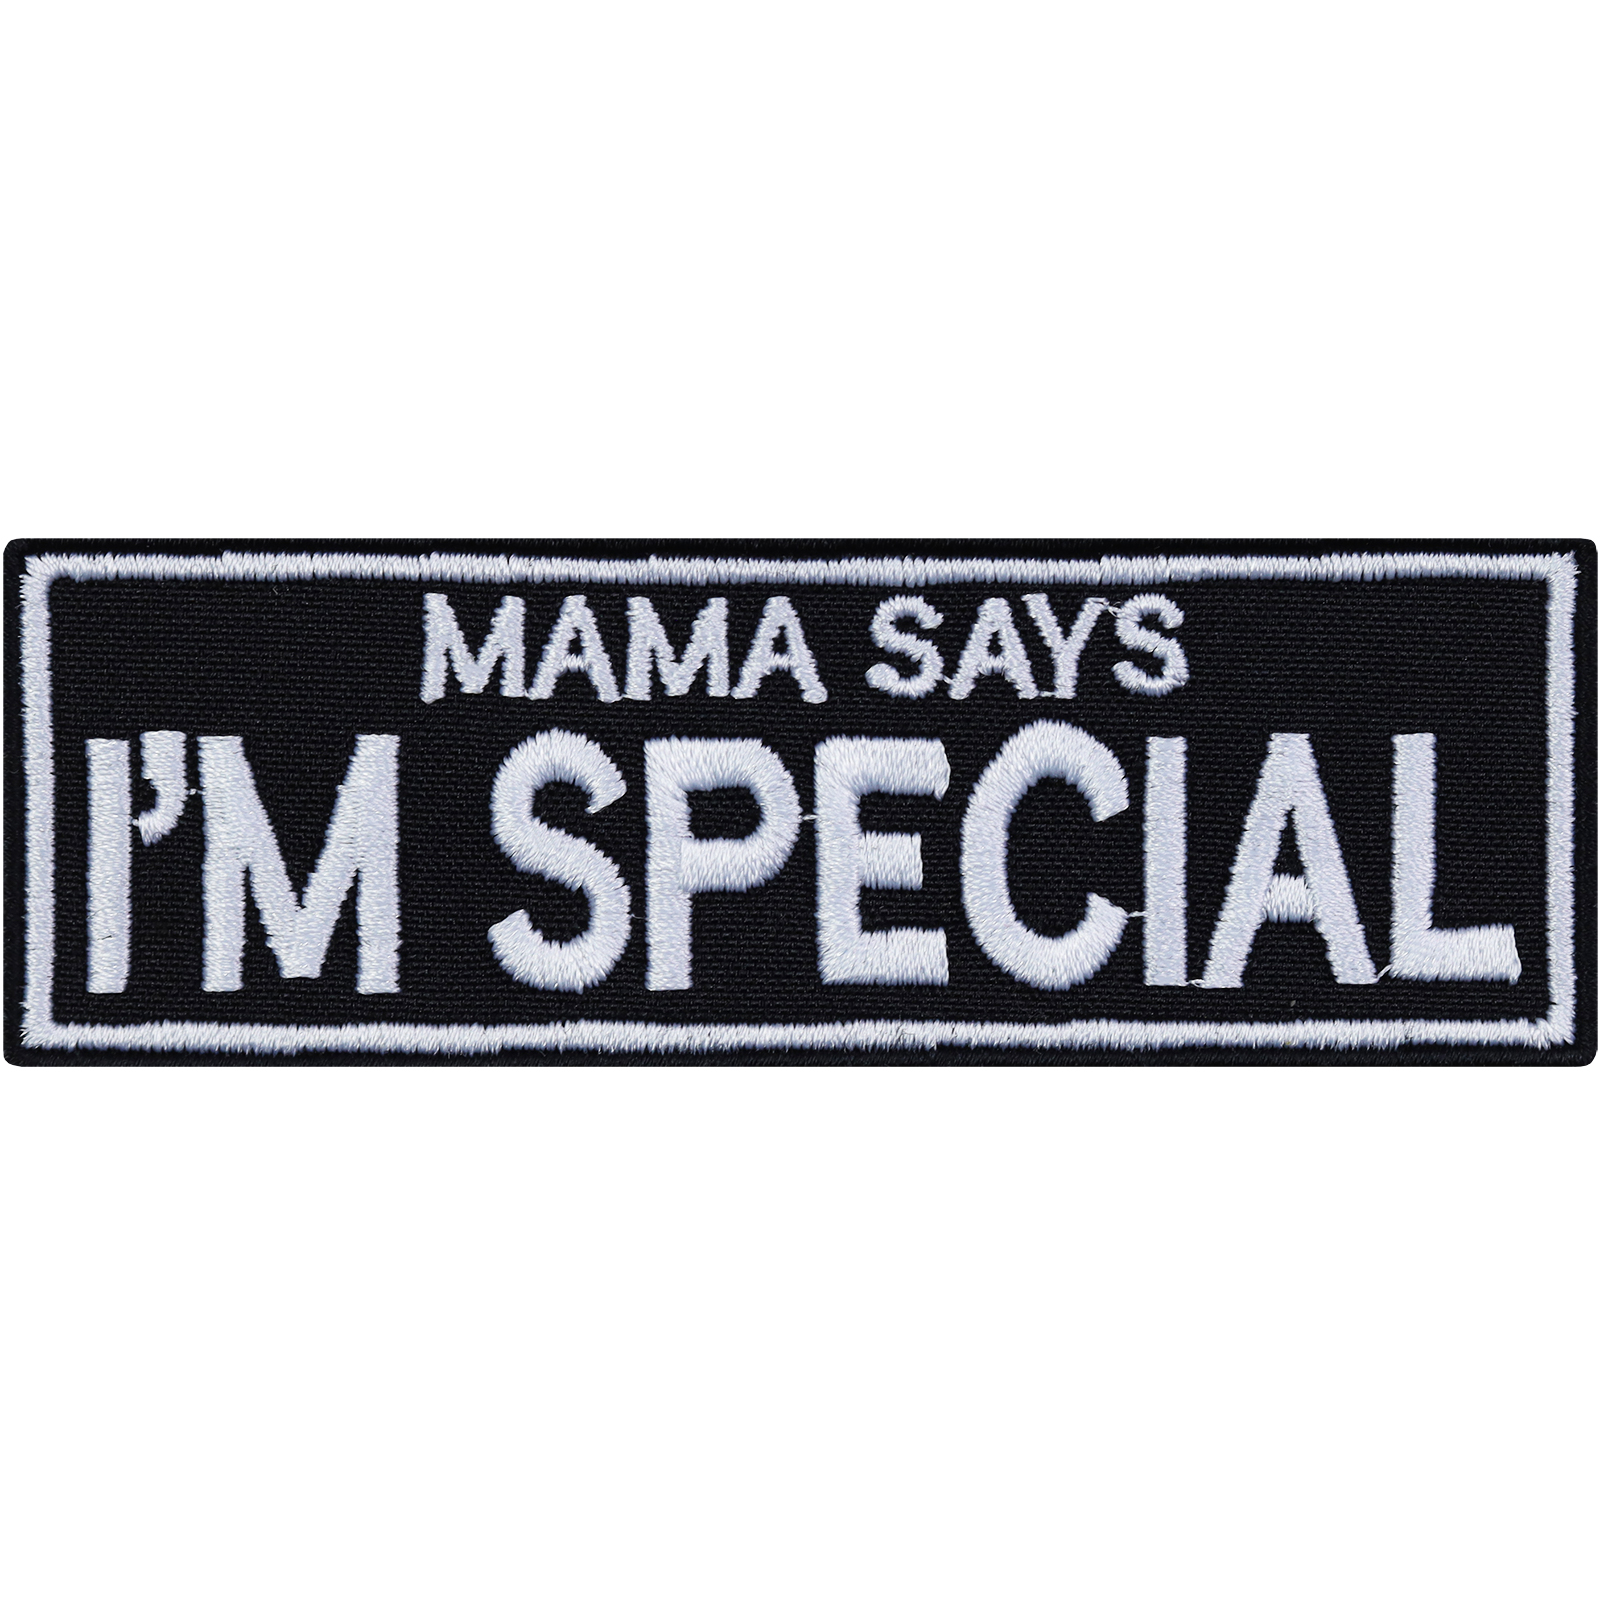 Mama says: I'm special - Patch